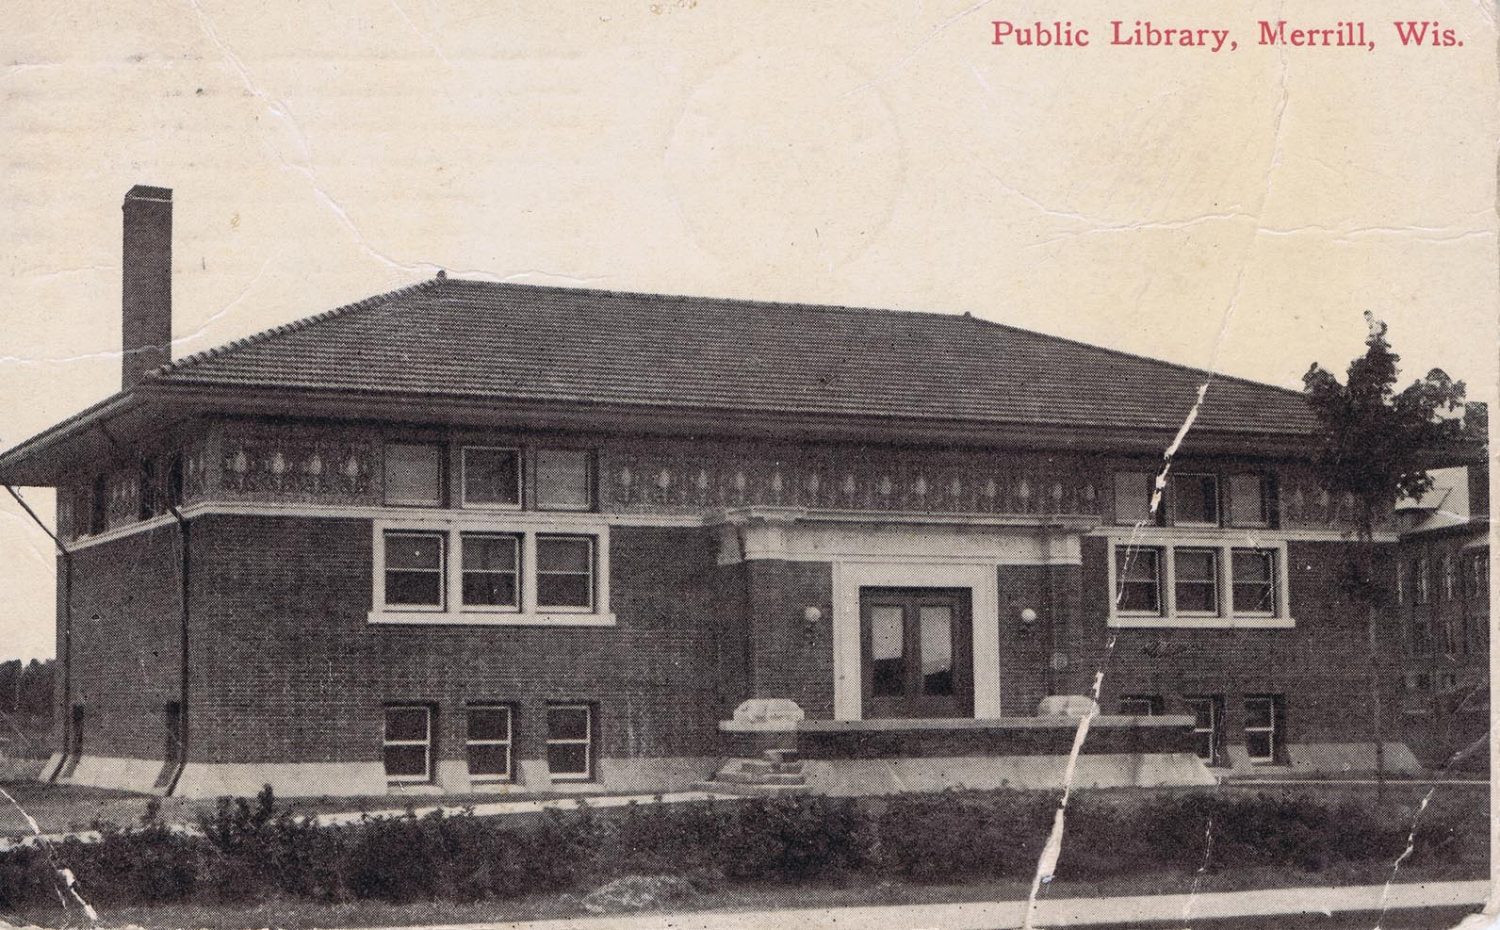 Celebrating 125 years of Merrill libraries in March